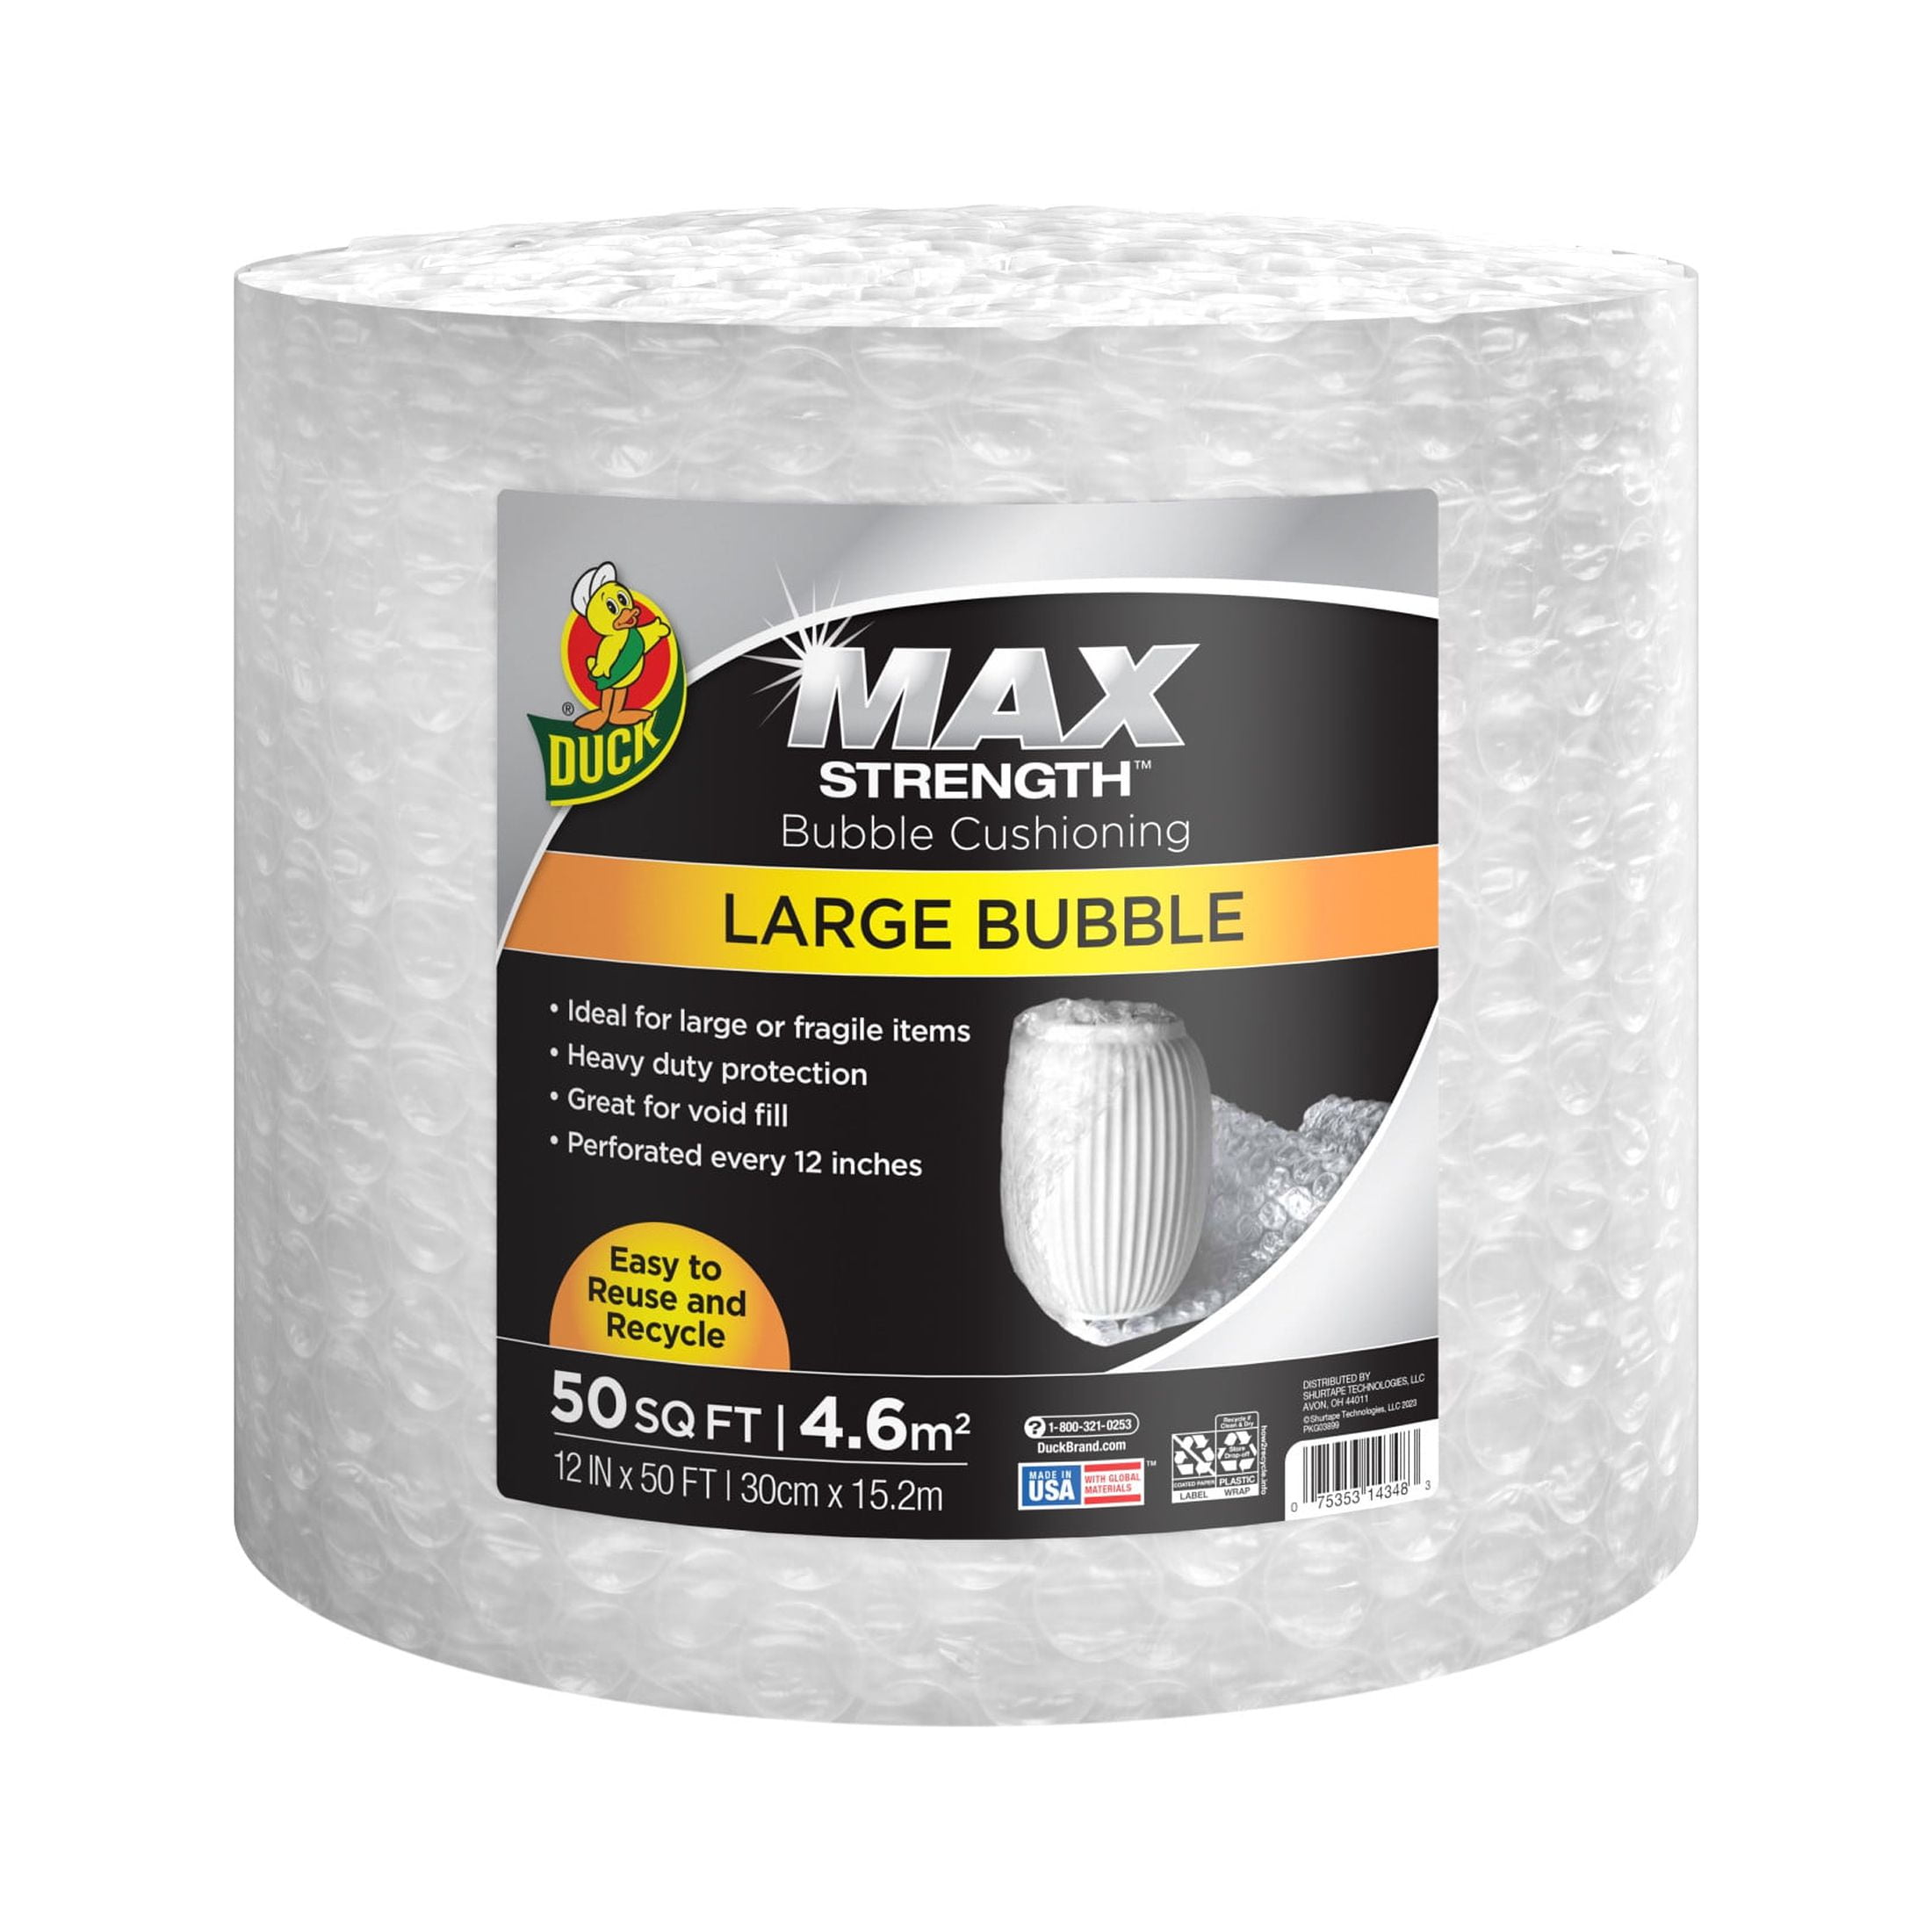 Duck Max Strength Large Bubble Cushioning Wrap, 12 in x 100 ft